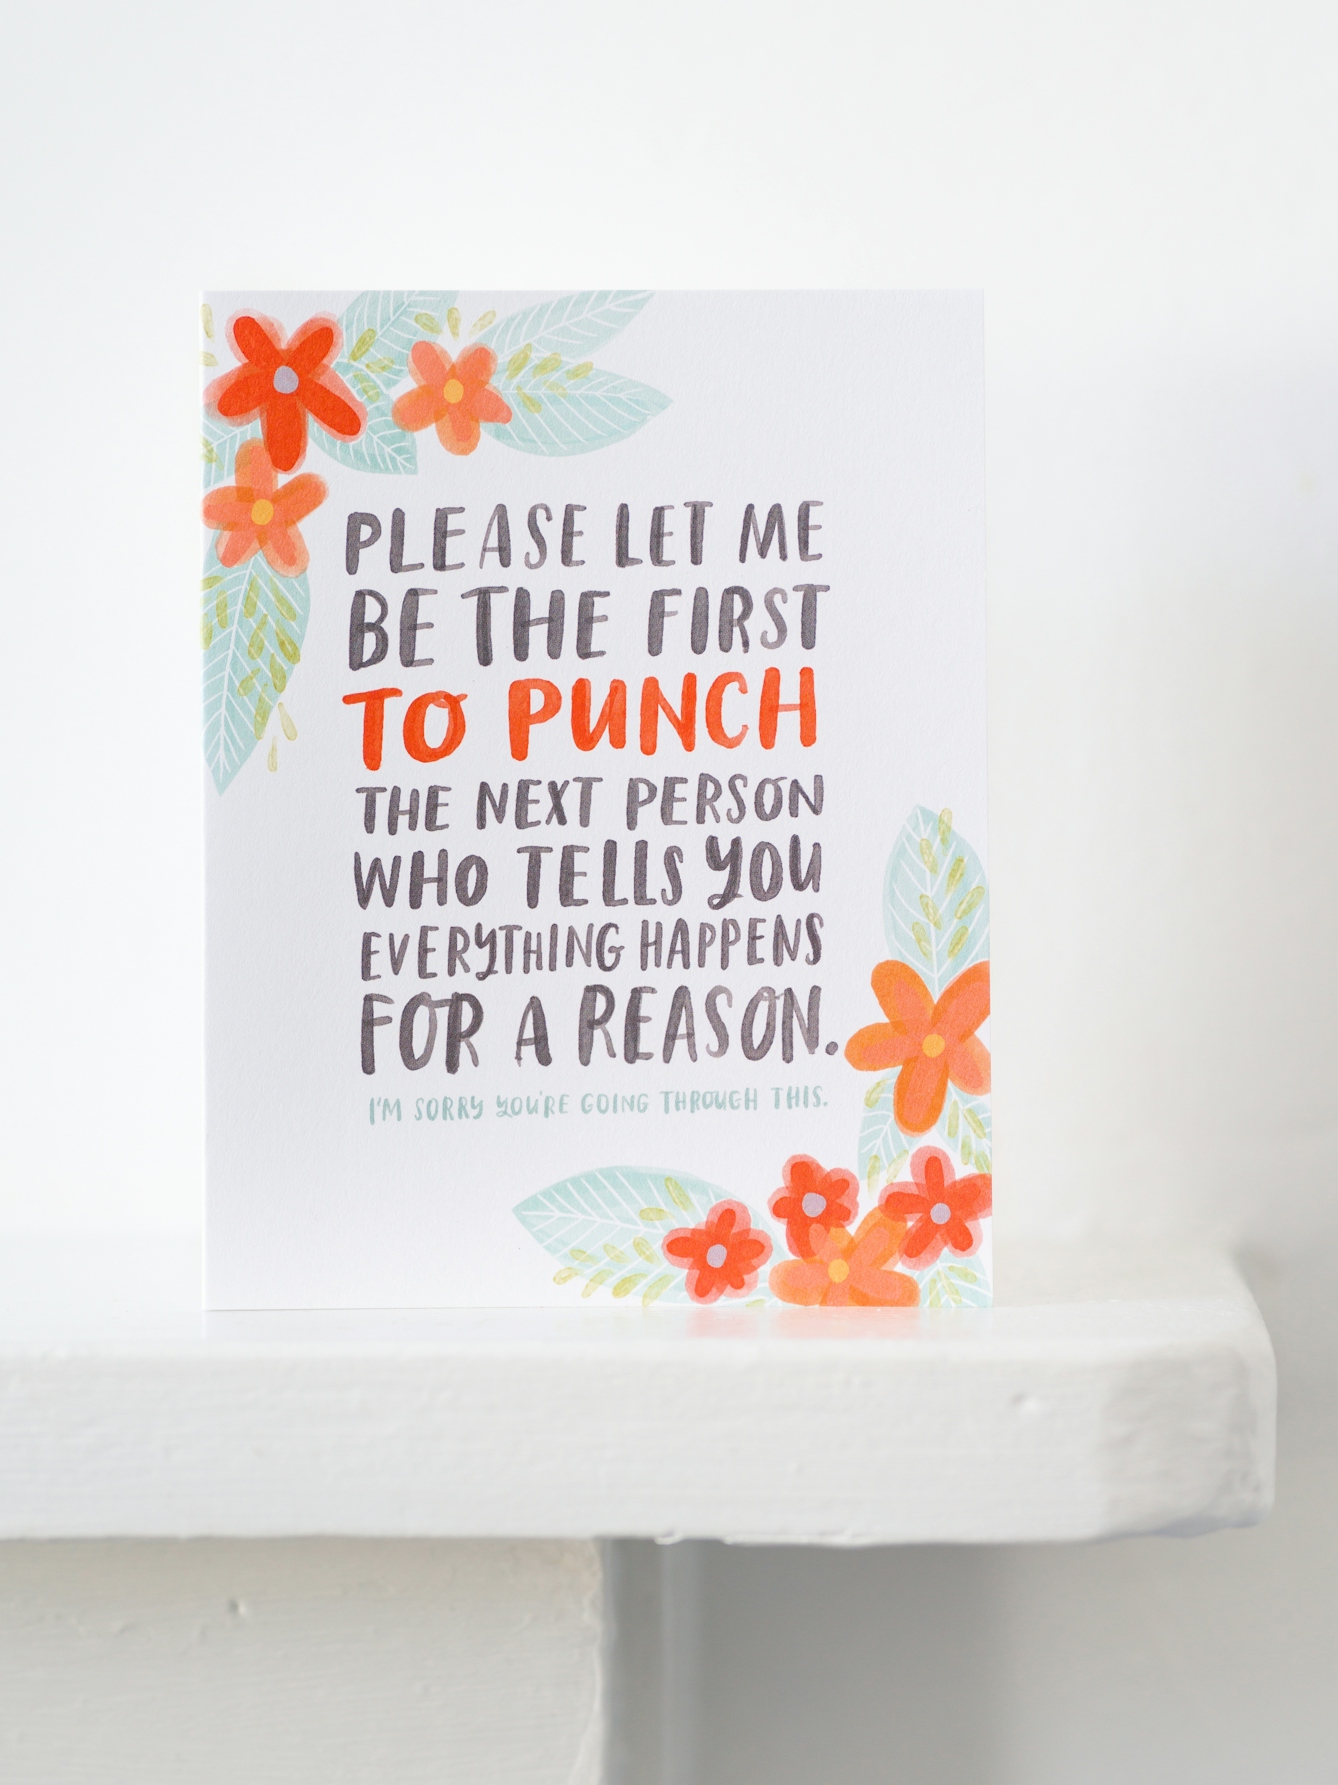 Photograph of a white mantelpiece against a white wall. On the mantlepiece is a greetings card which reads, 'Please let me be the first to punch the next person who tells you everything happens for a reason. I'm sorry you're going through this'.